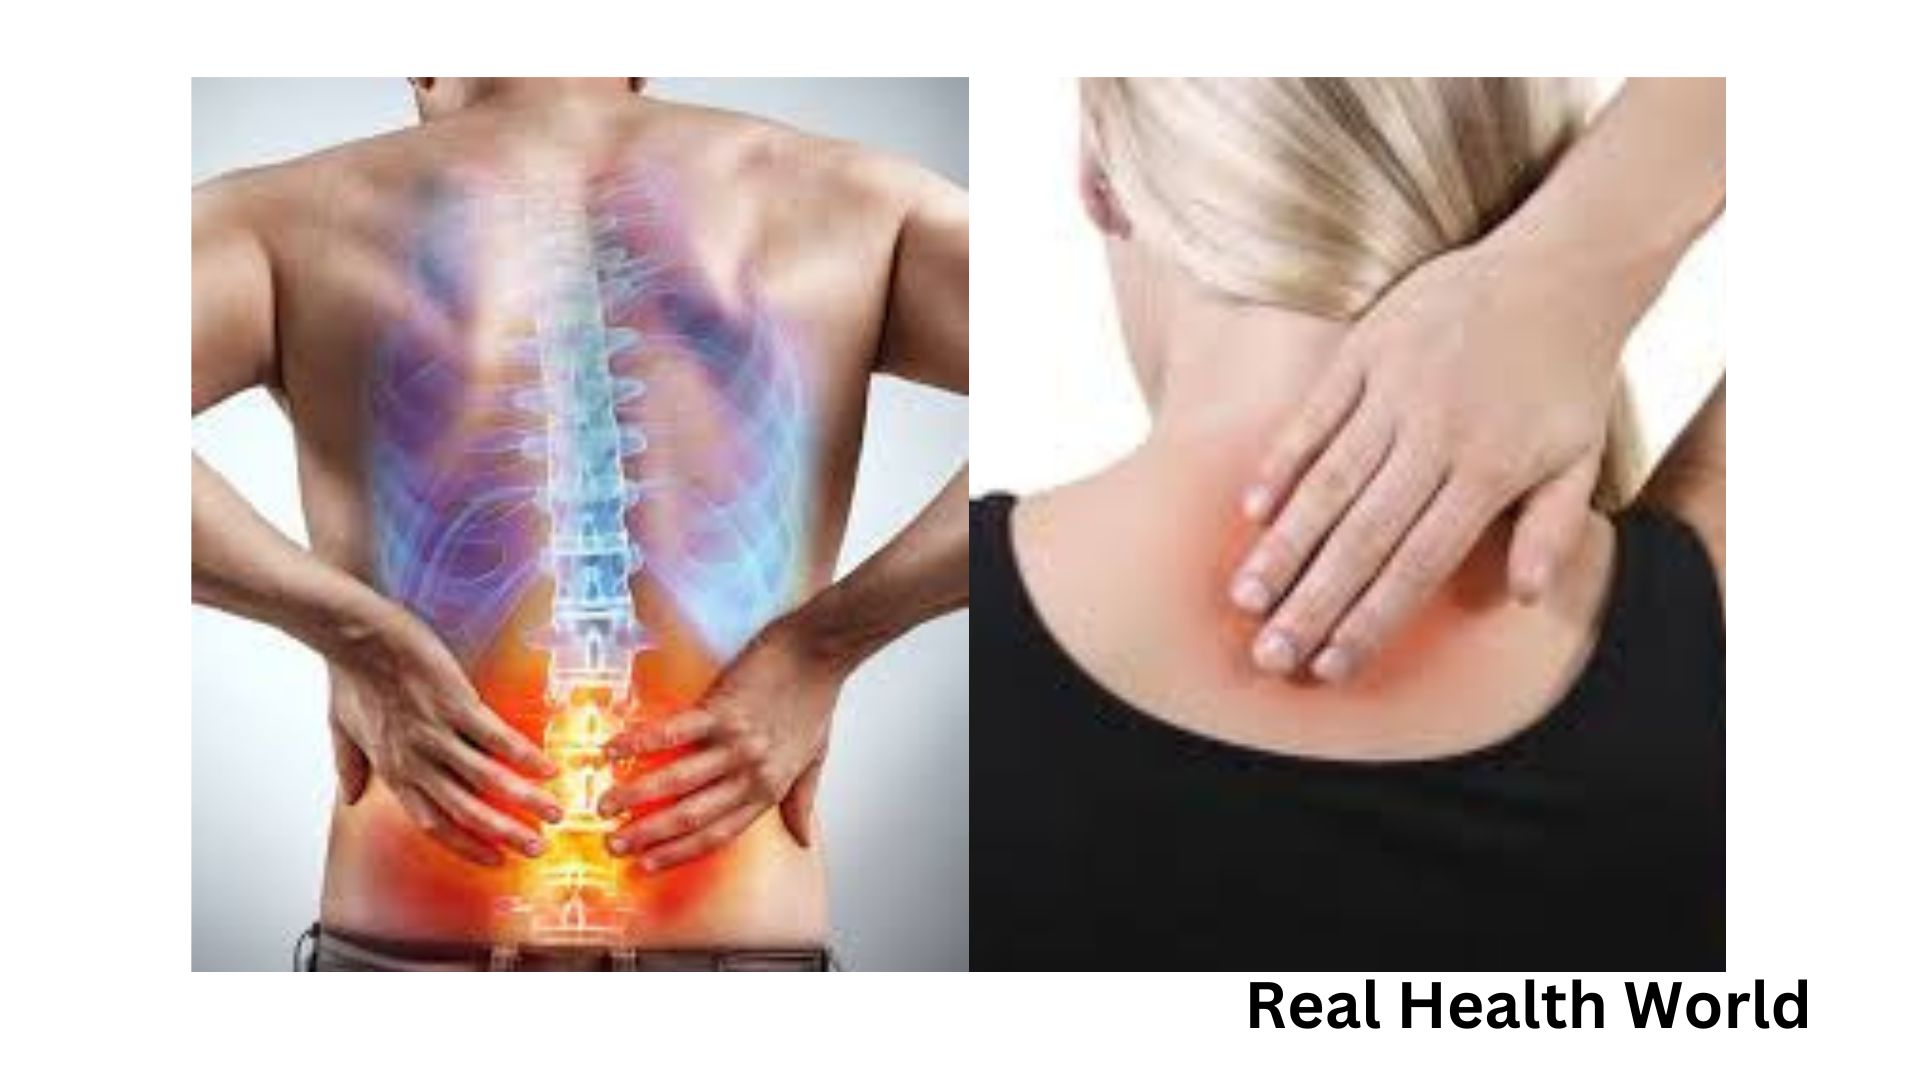 Why sudden neck and back pain?